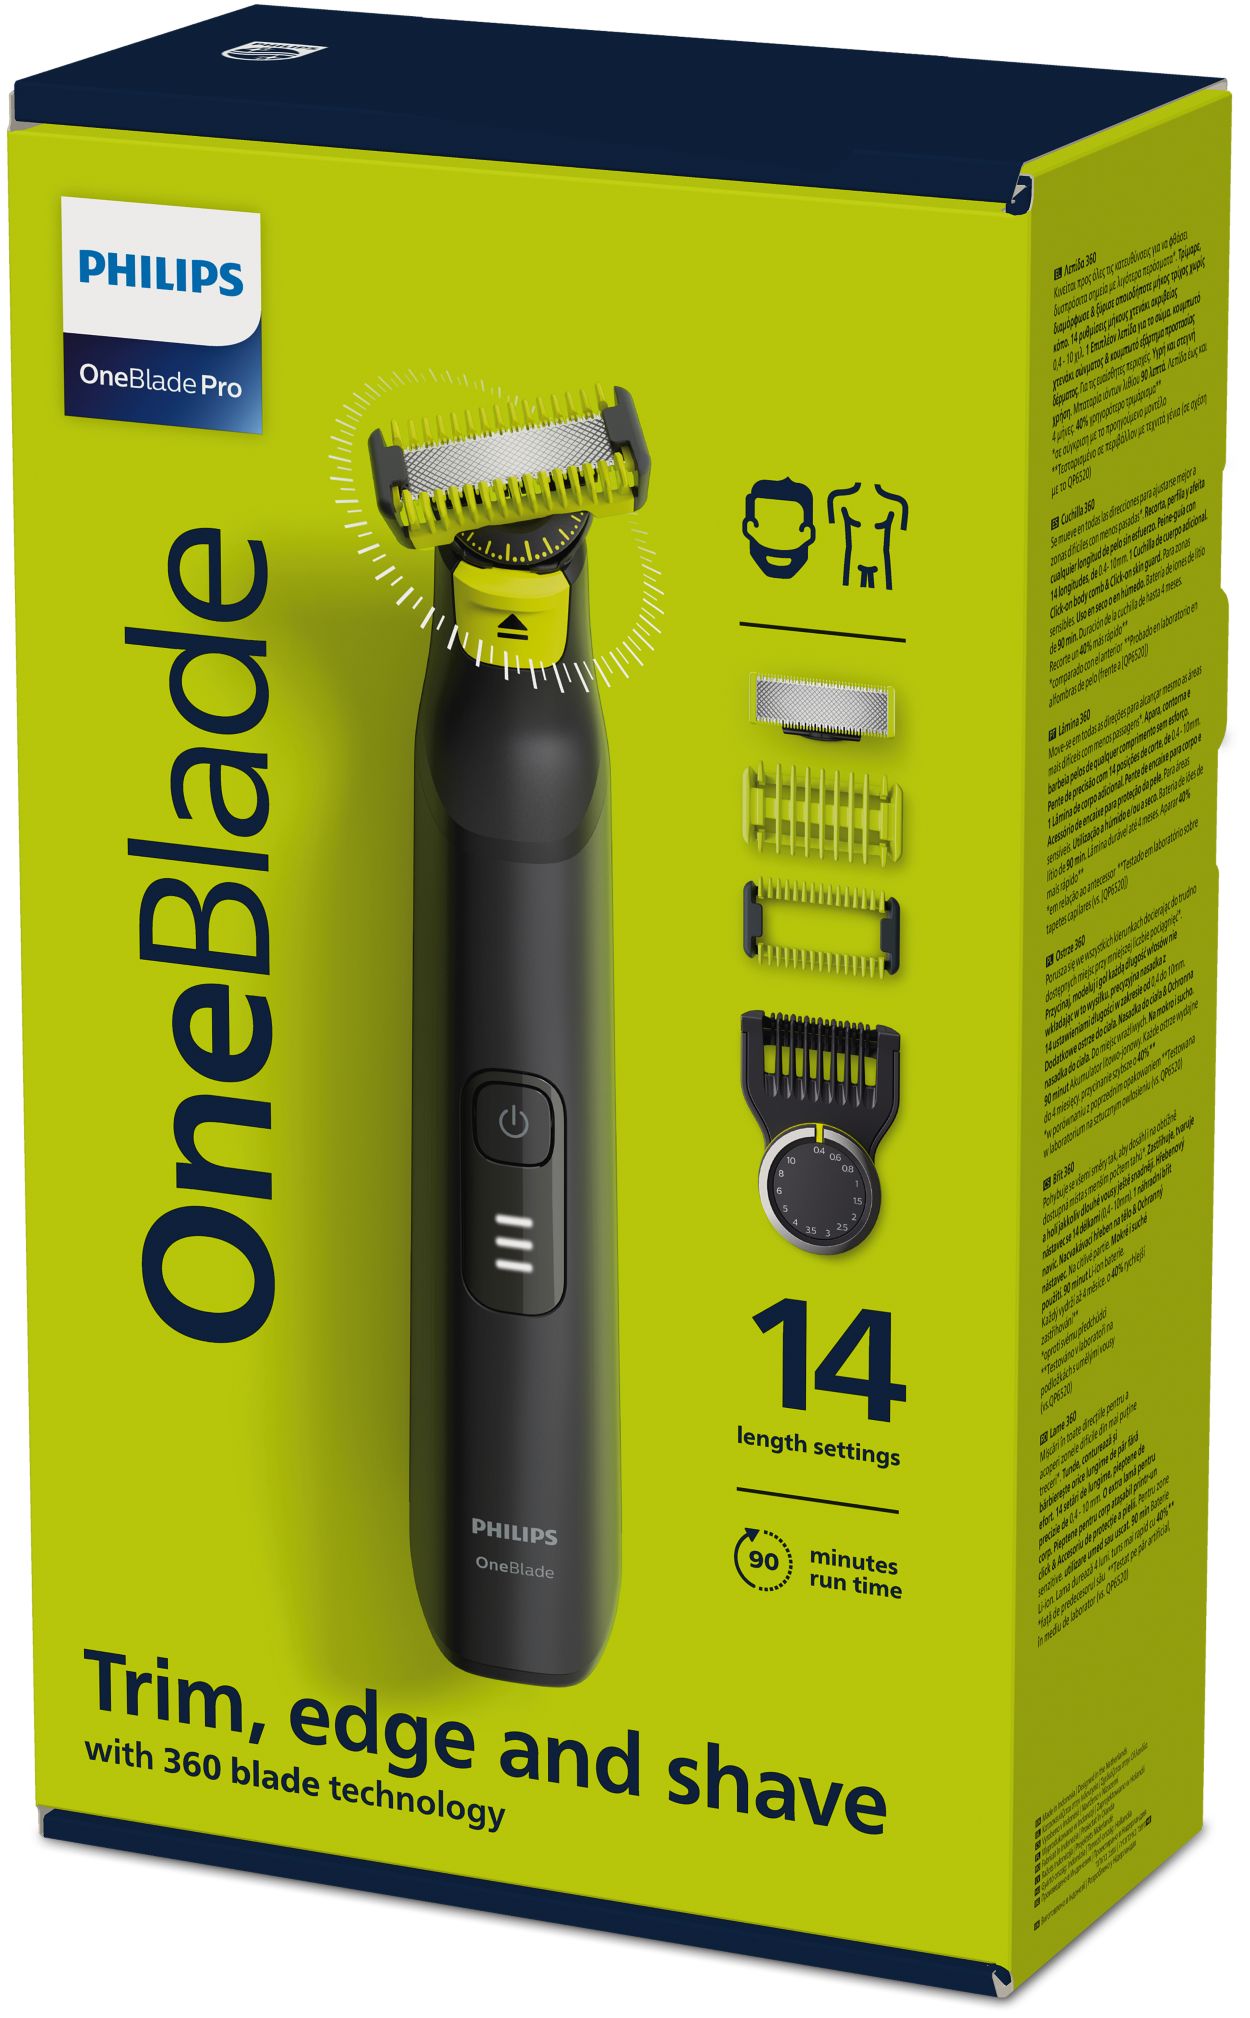 OneBlade Pro 360 Rechargeable shaver and trimmer with accessories QP6541/15